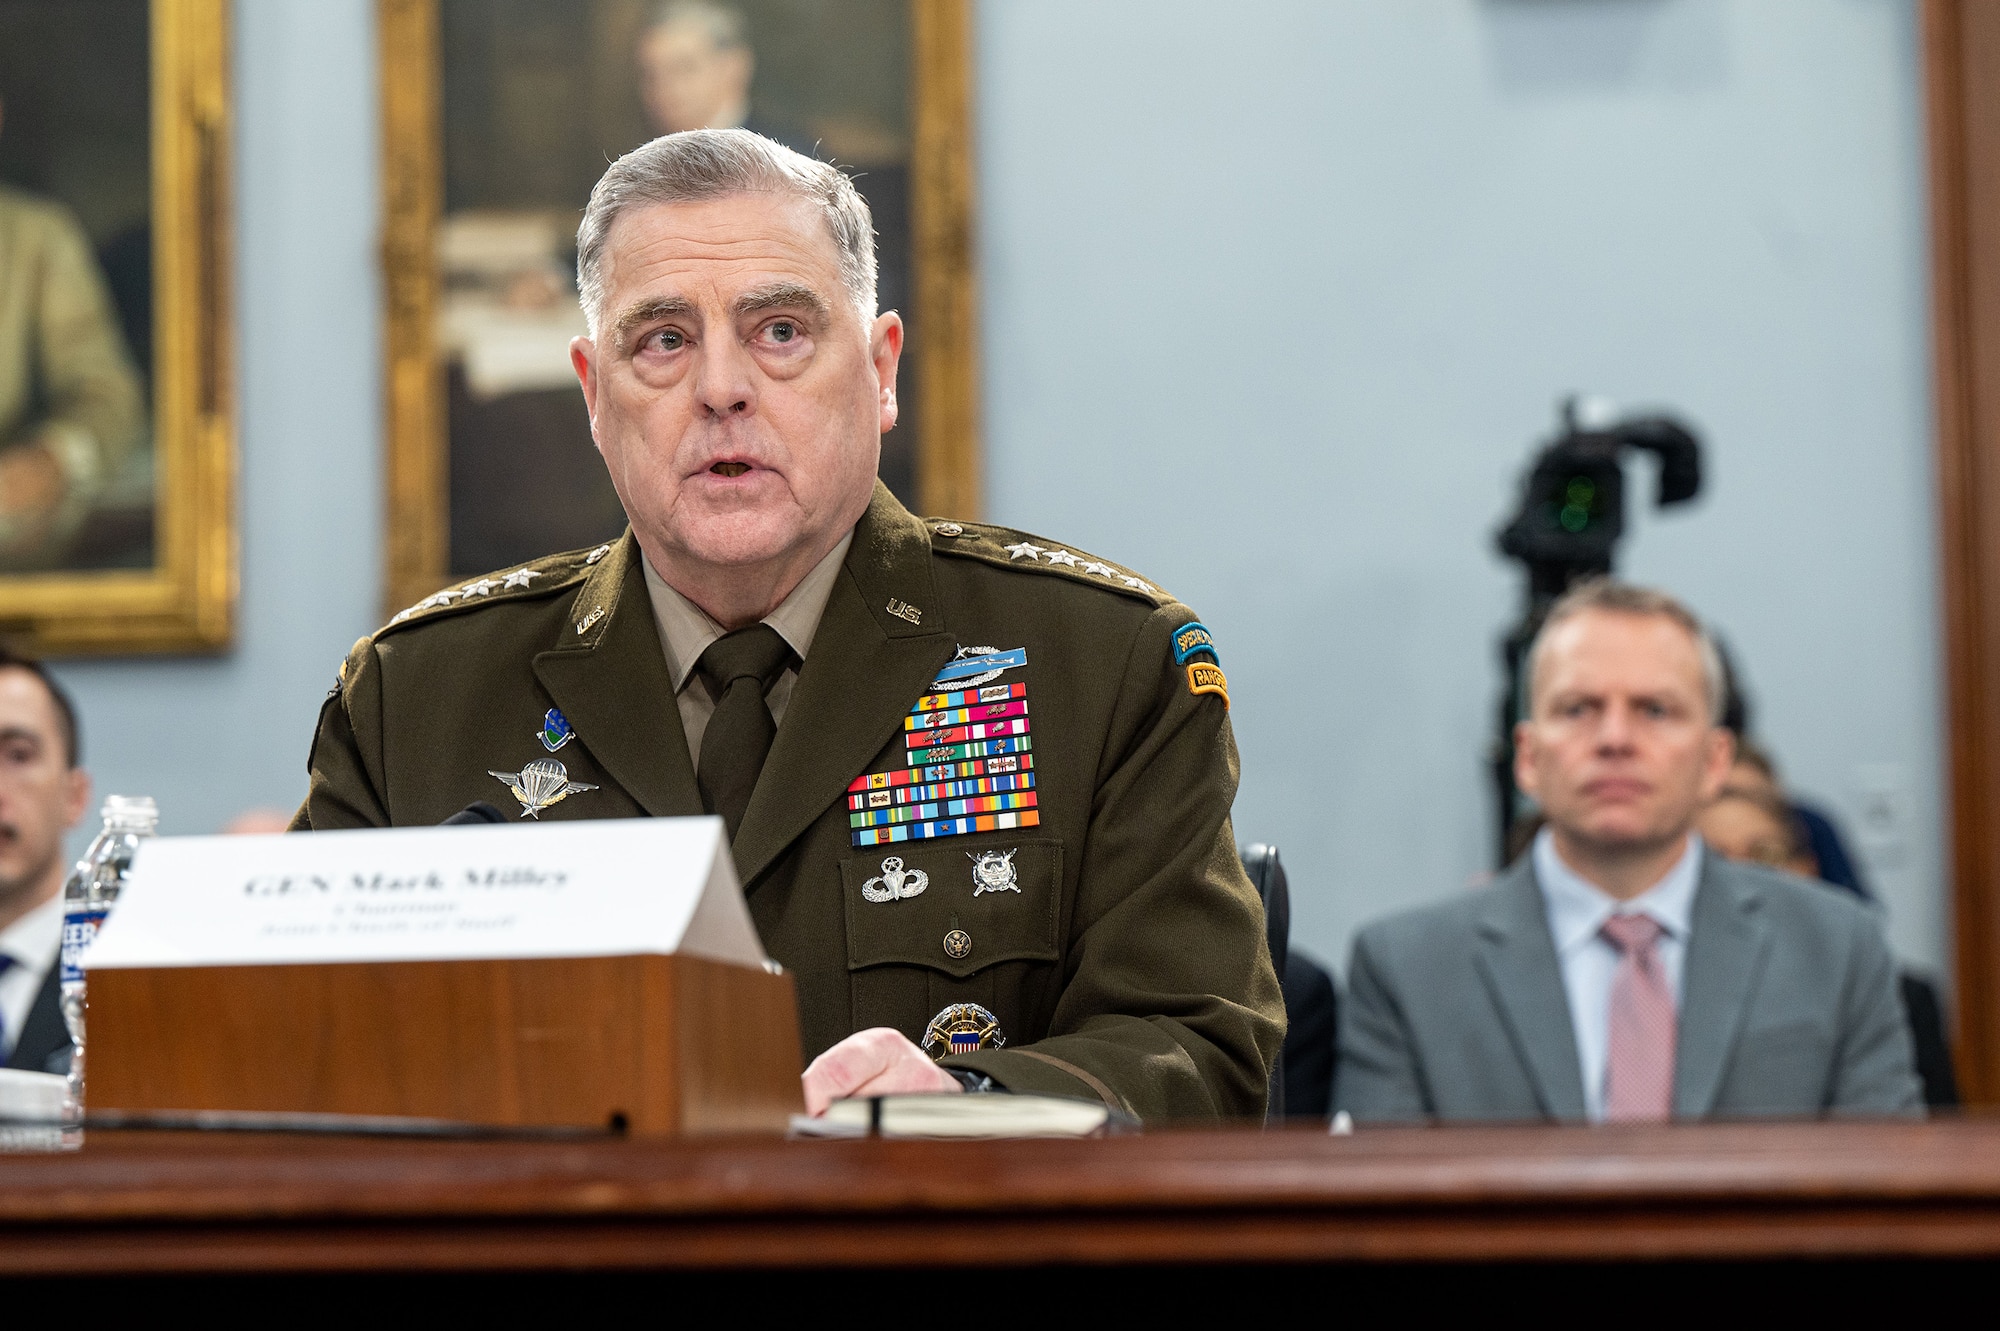 Army Gen. Mark A. Milley sits and speaks at a table.